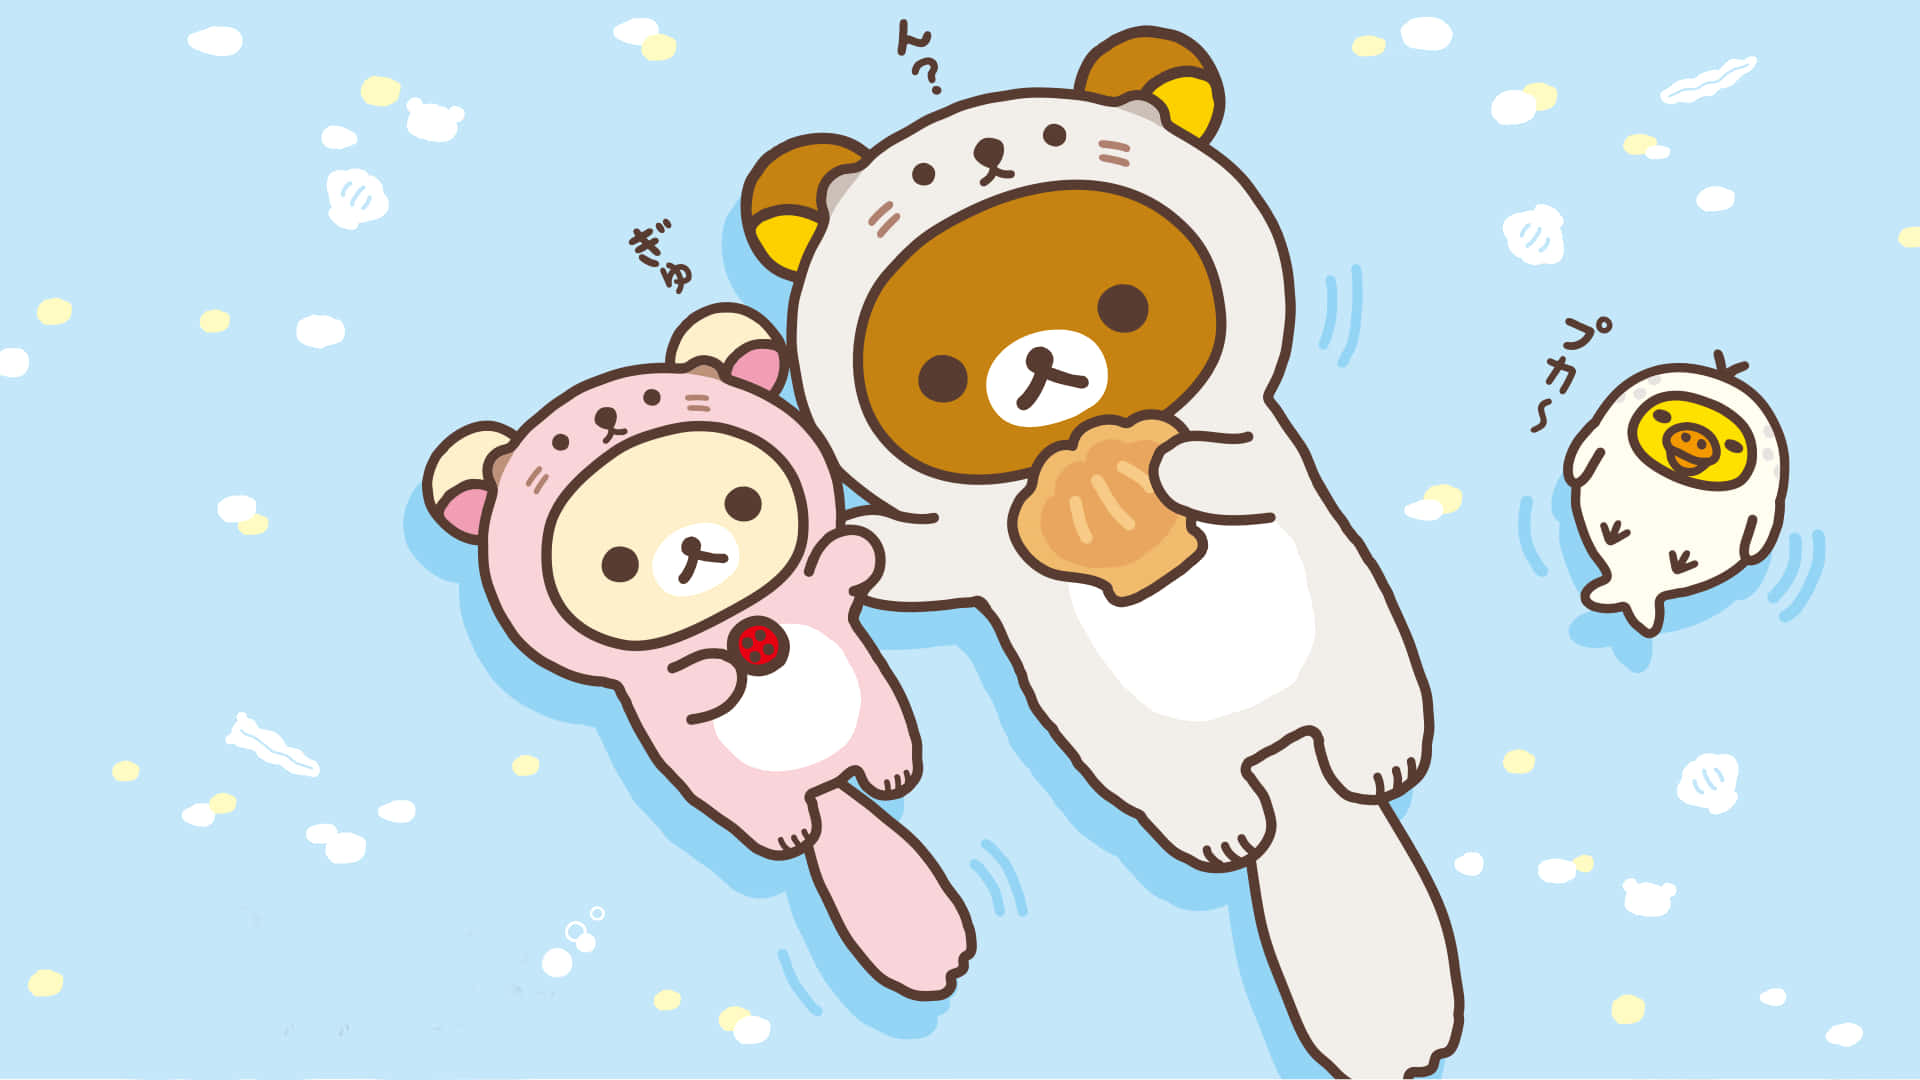 Get Ready To Be Productive With A Cute&Fun Rilakkuma Laptop Wallpaper